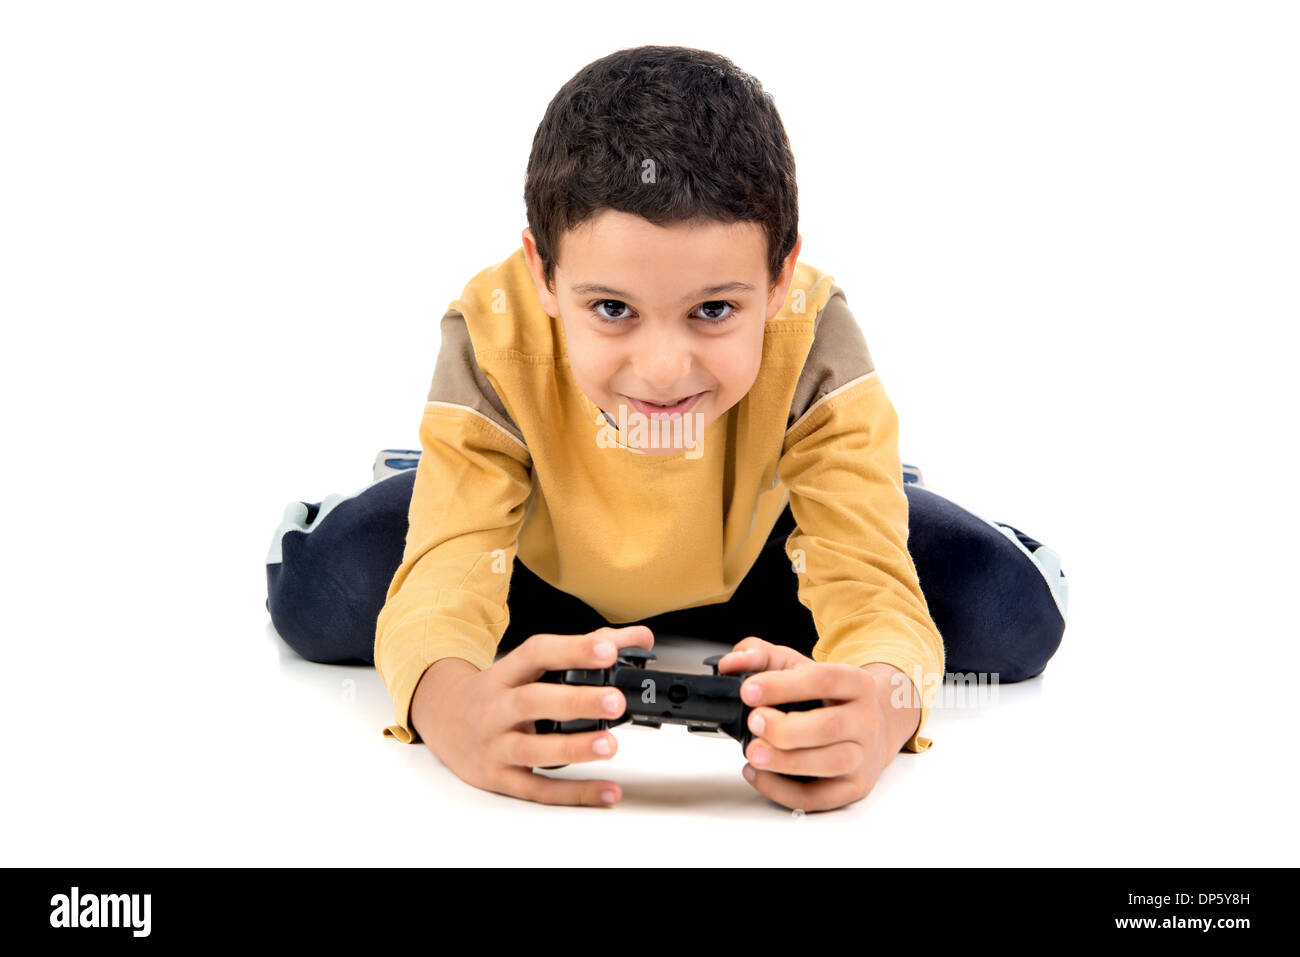 Boy playing video games isolated in white Stock Photo